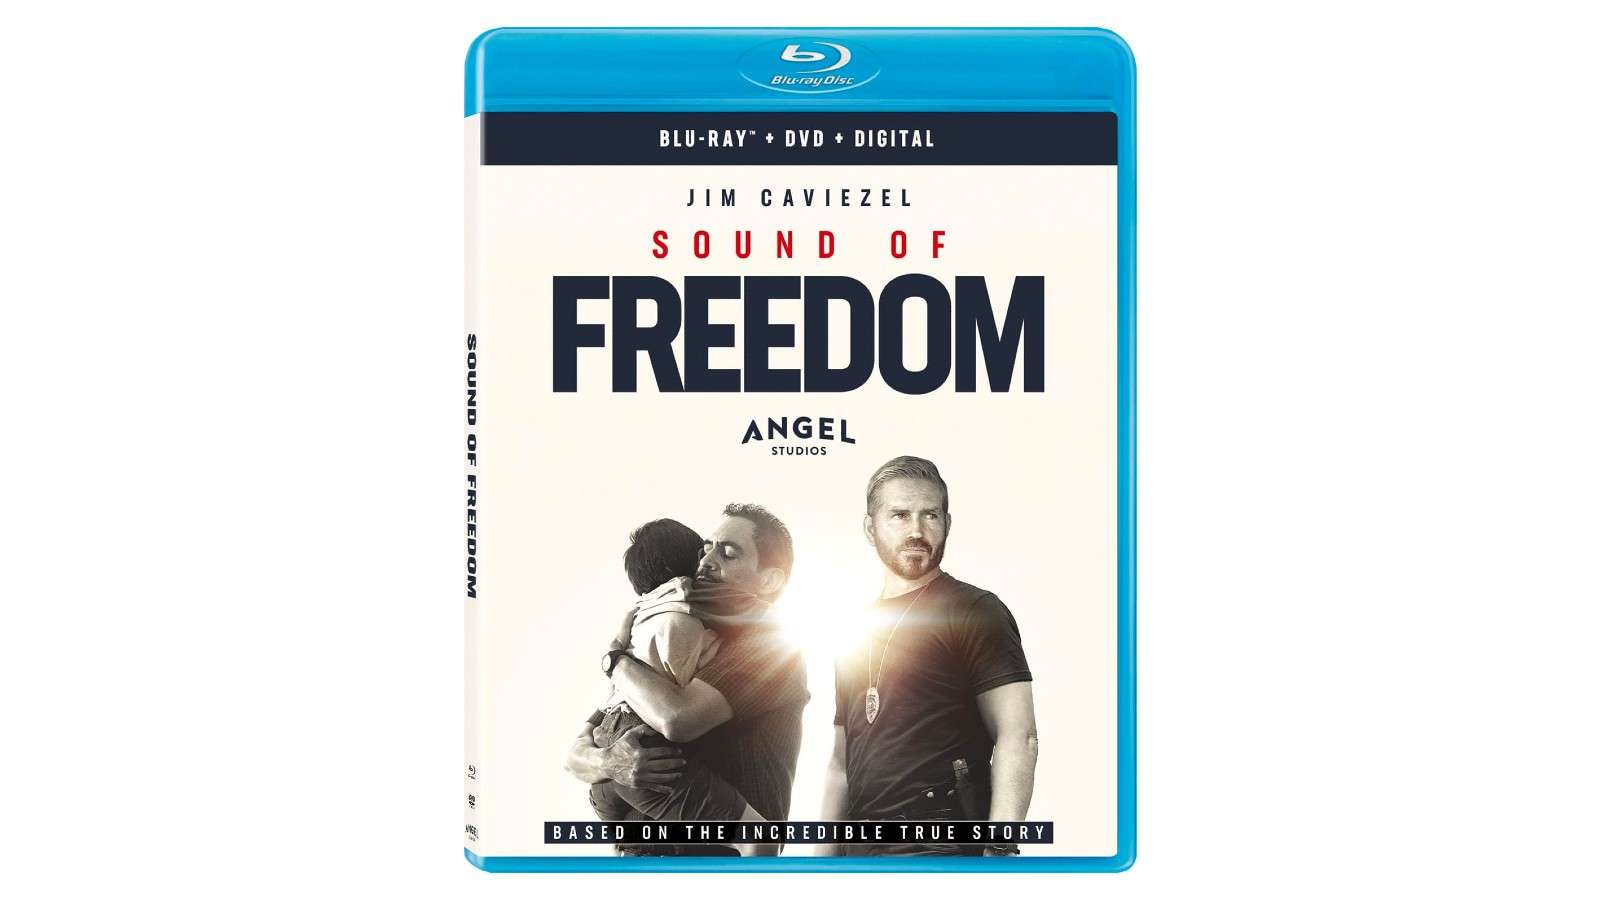 The Blu-ray copy of Sound of Freedom